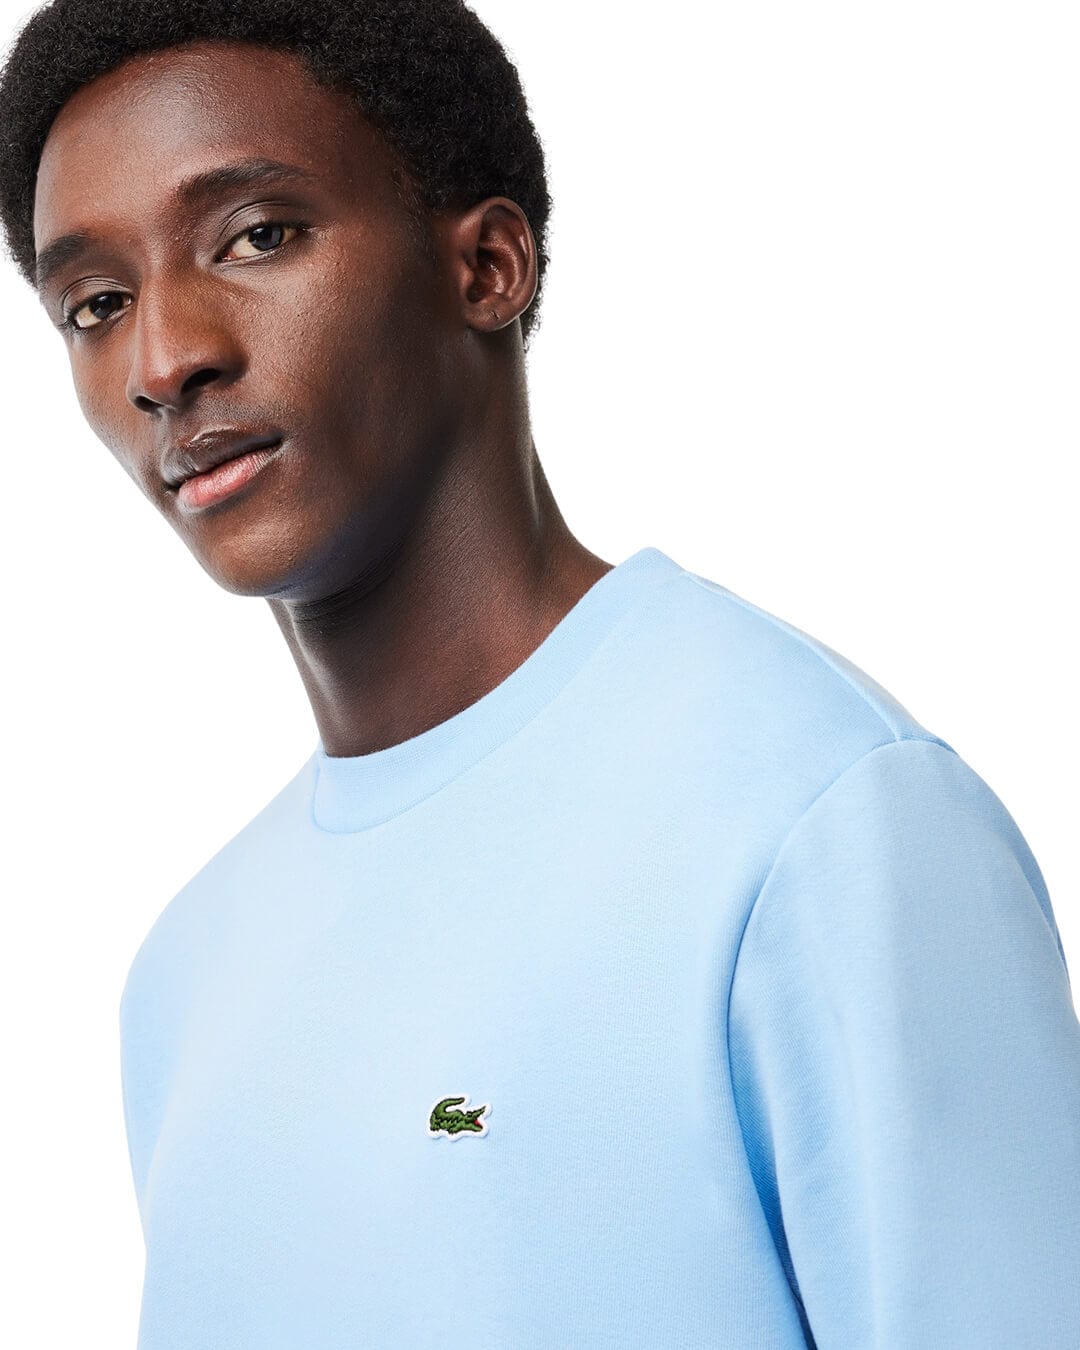 Lacoste Jumpers Lacoste Sky Organic Brushed Cotton Jogger Sweatshirt